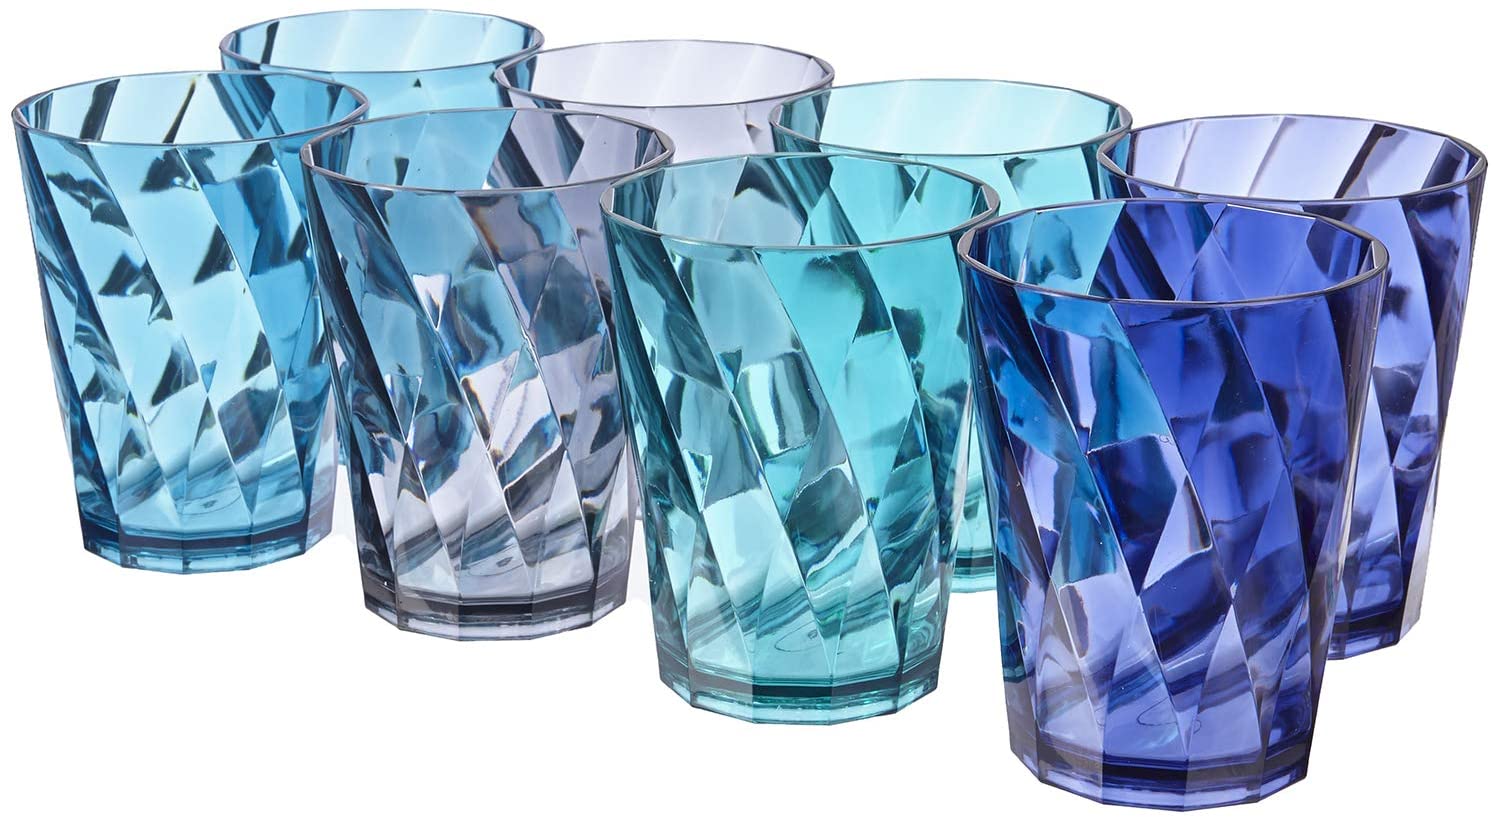 US Acrylic Optix Thick Wall Prism Design Plastic Tumblers & Water Glasses, 8-Count